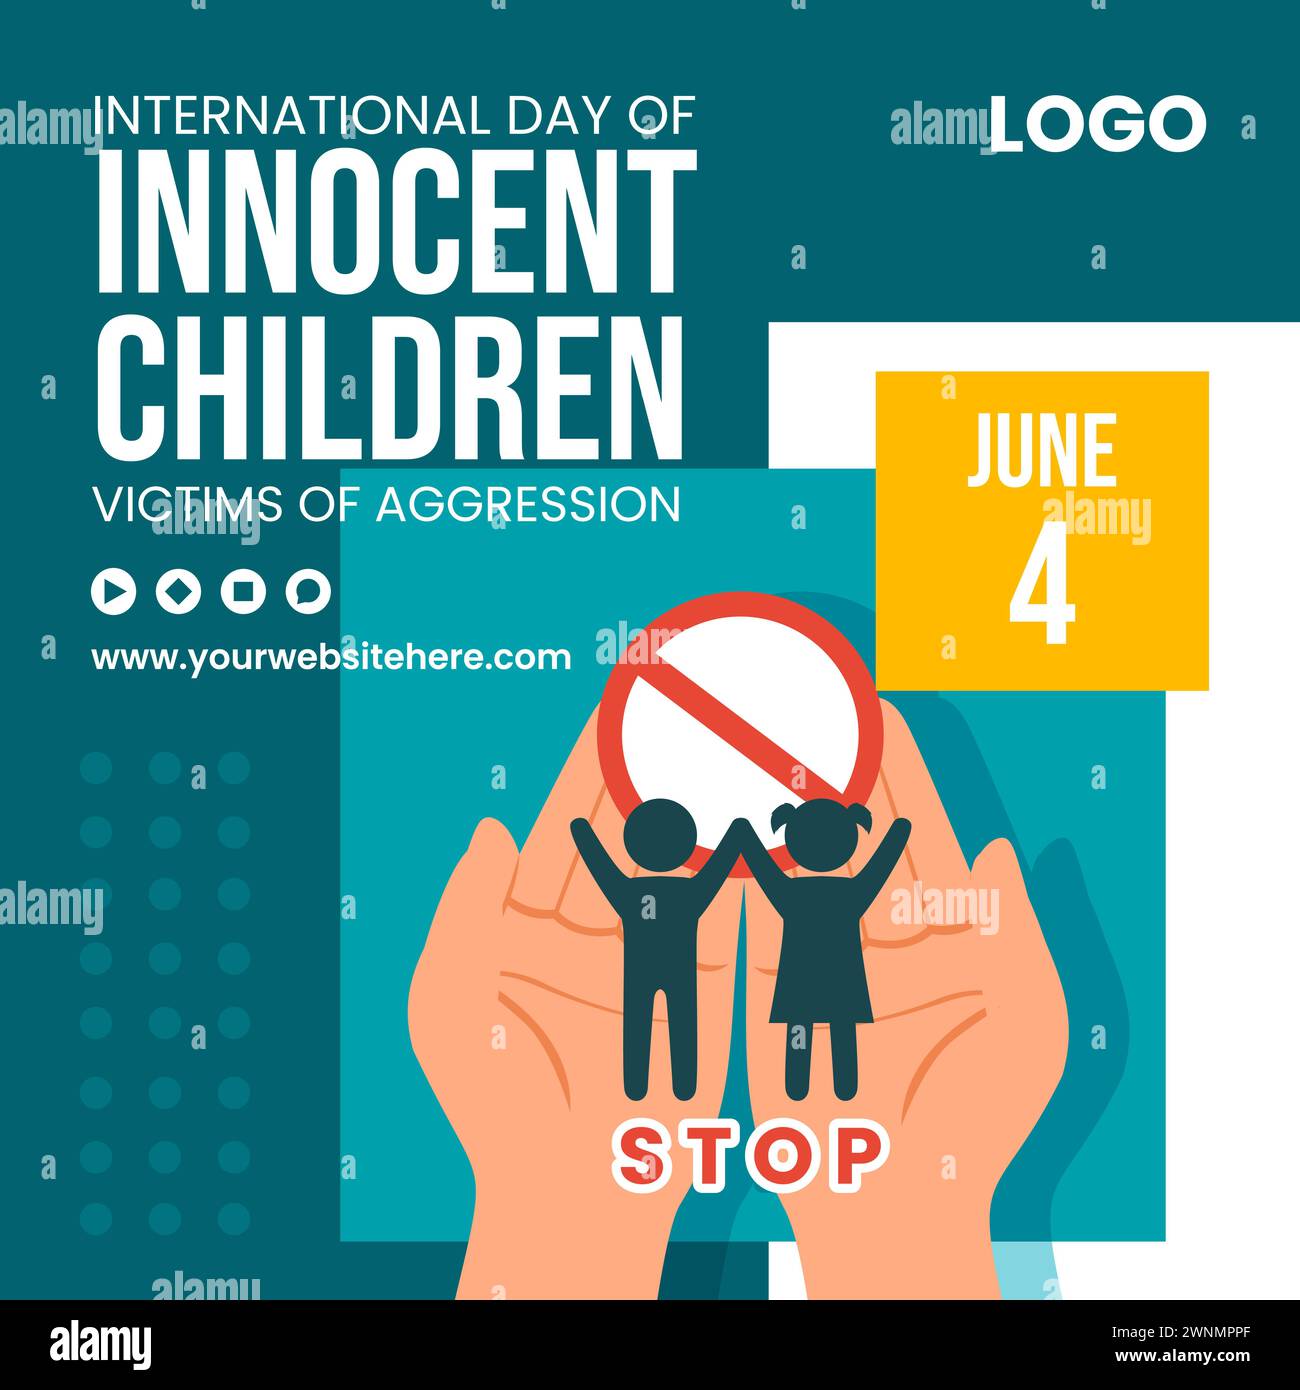 Innocent Children Victims of Aggression Social Media Illustration Hand Drawn Templates Background Stock Vector